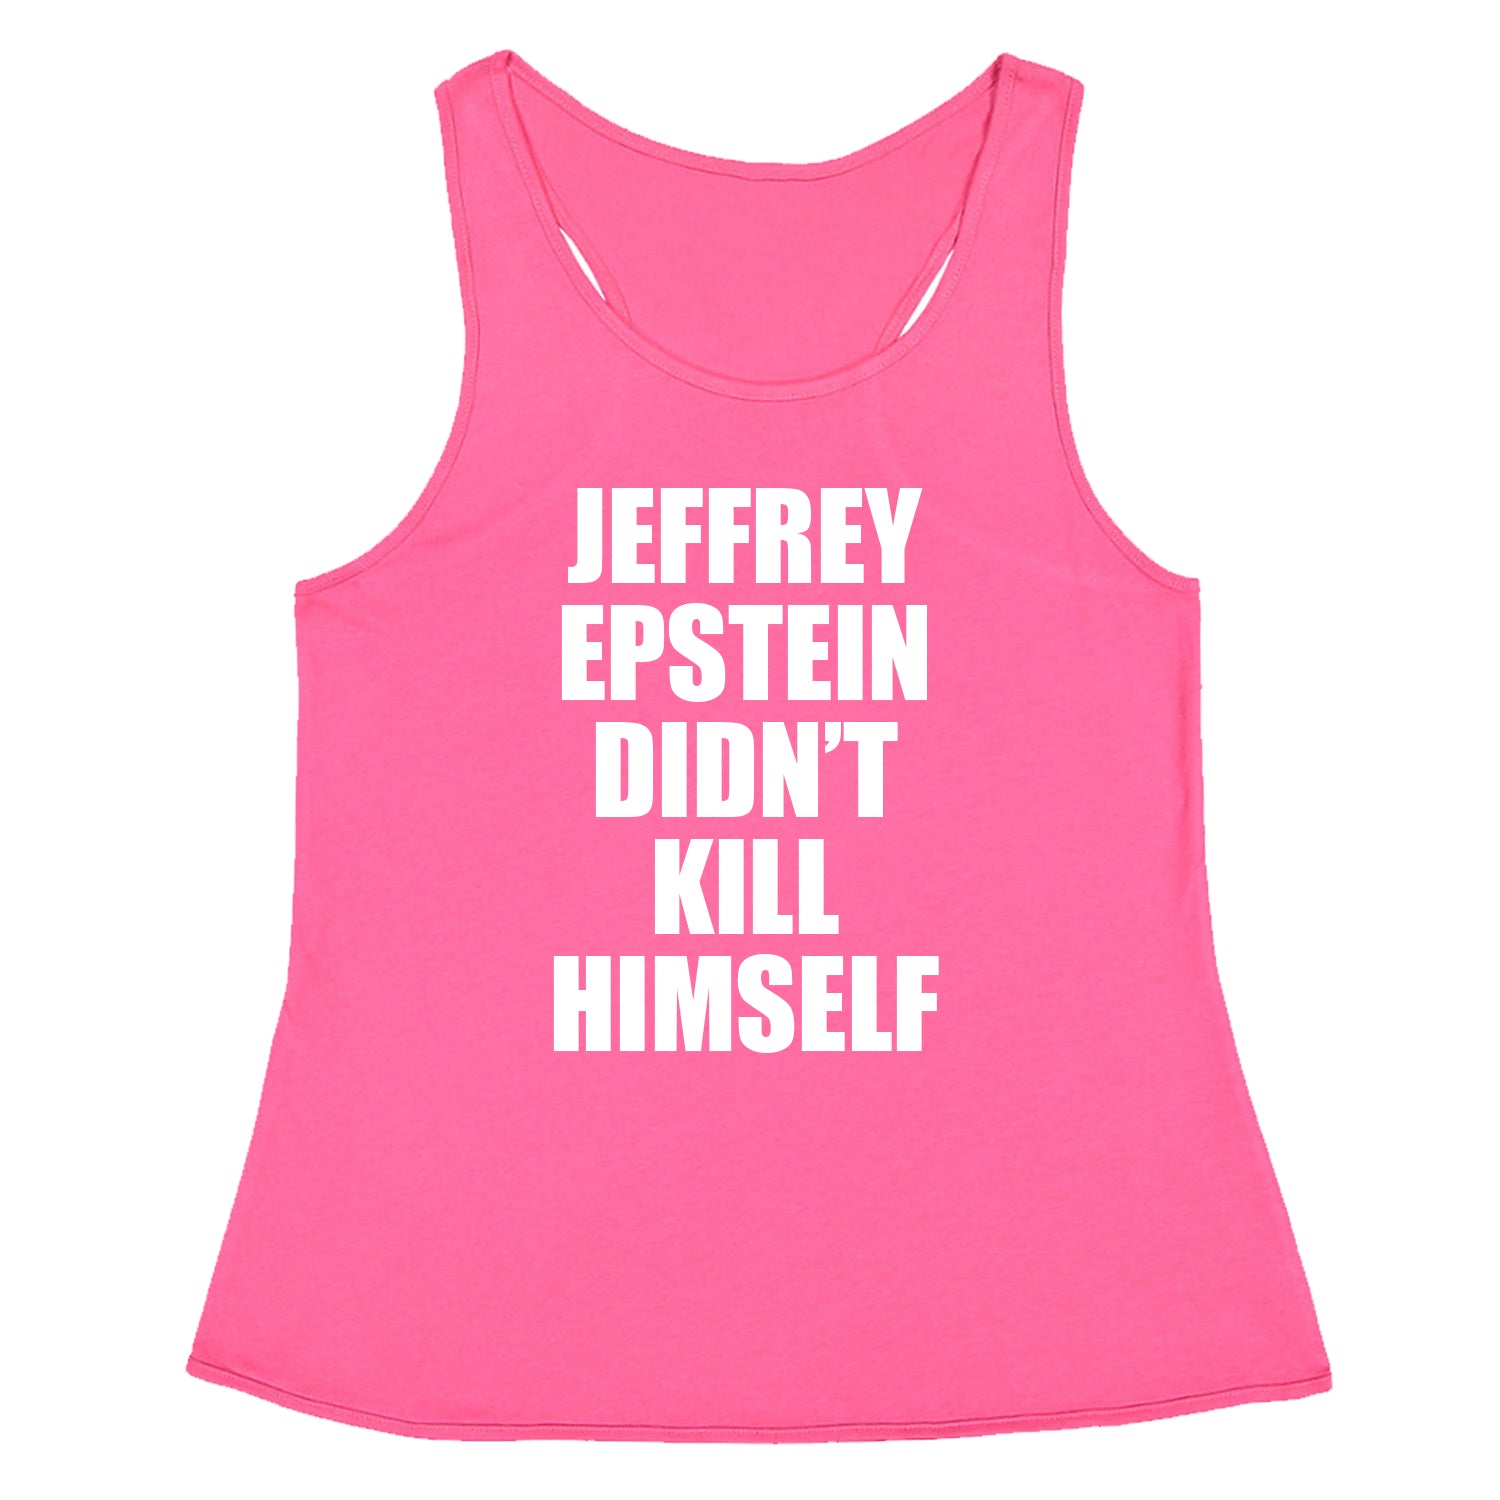 Jeffrey Epstein Didn't Kill Himself Racerback Tank Top for Women coverup, homicide, murder, ssadgk, trump by Expression Tees